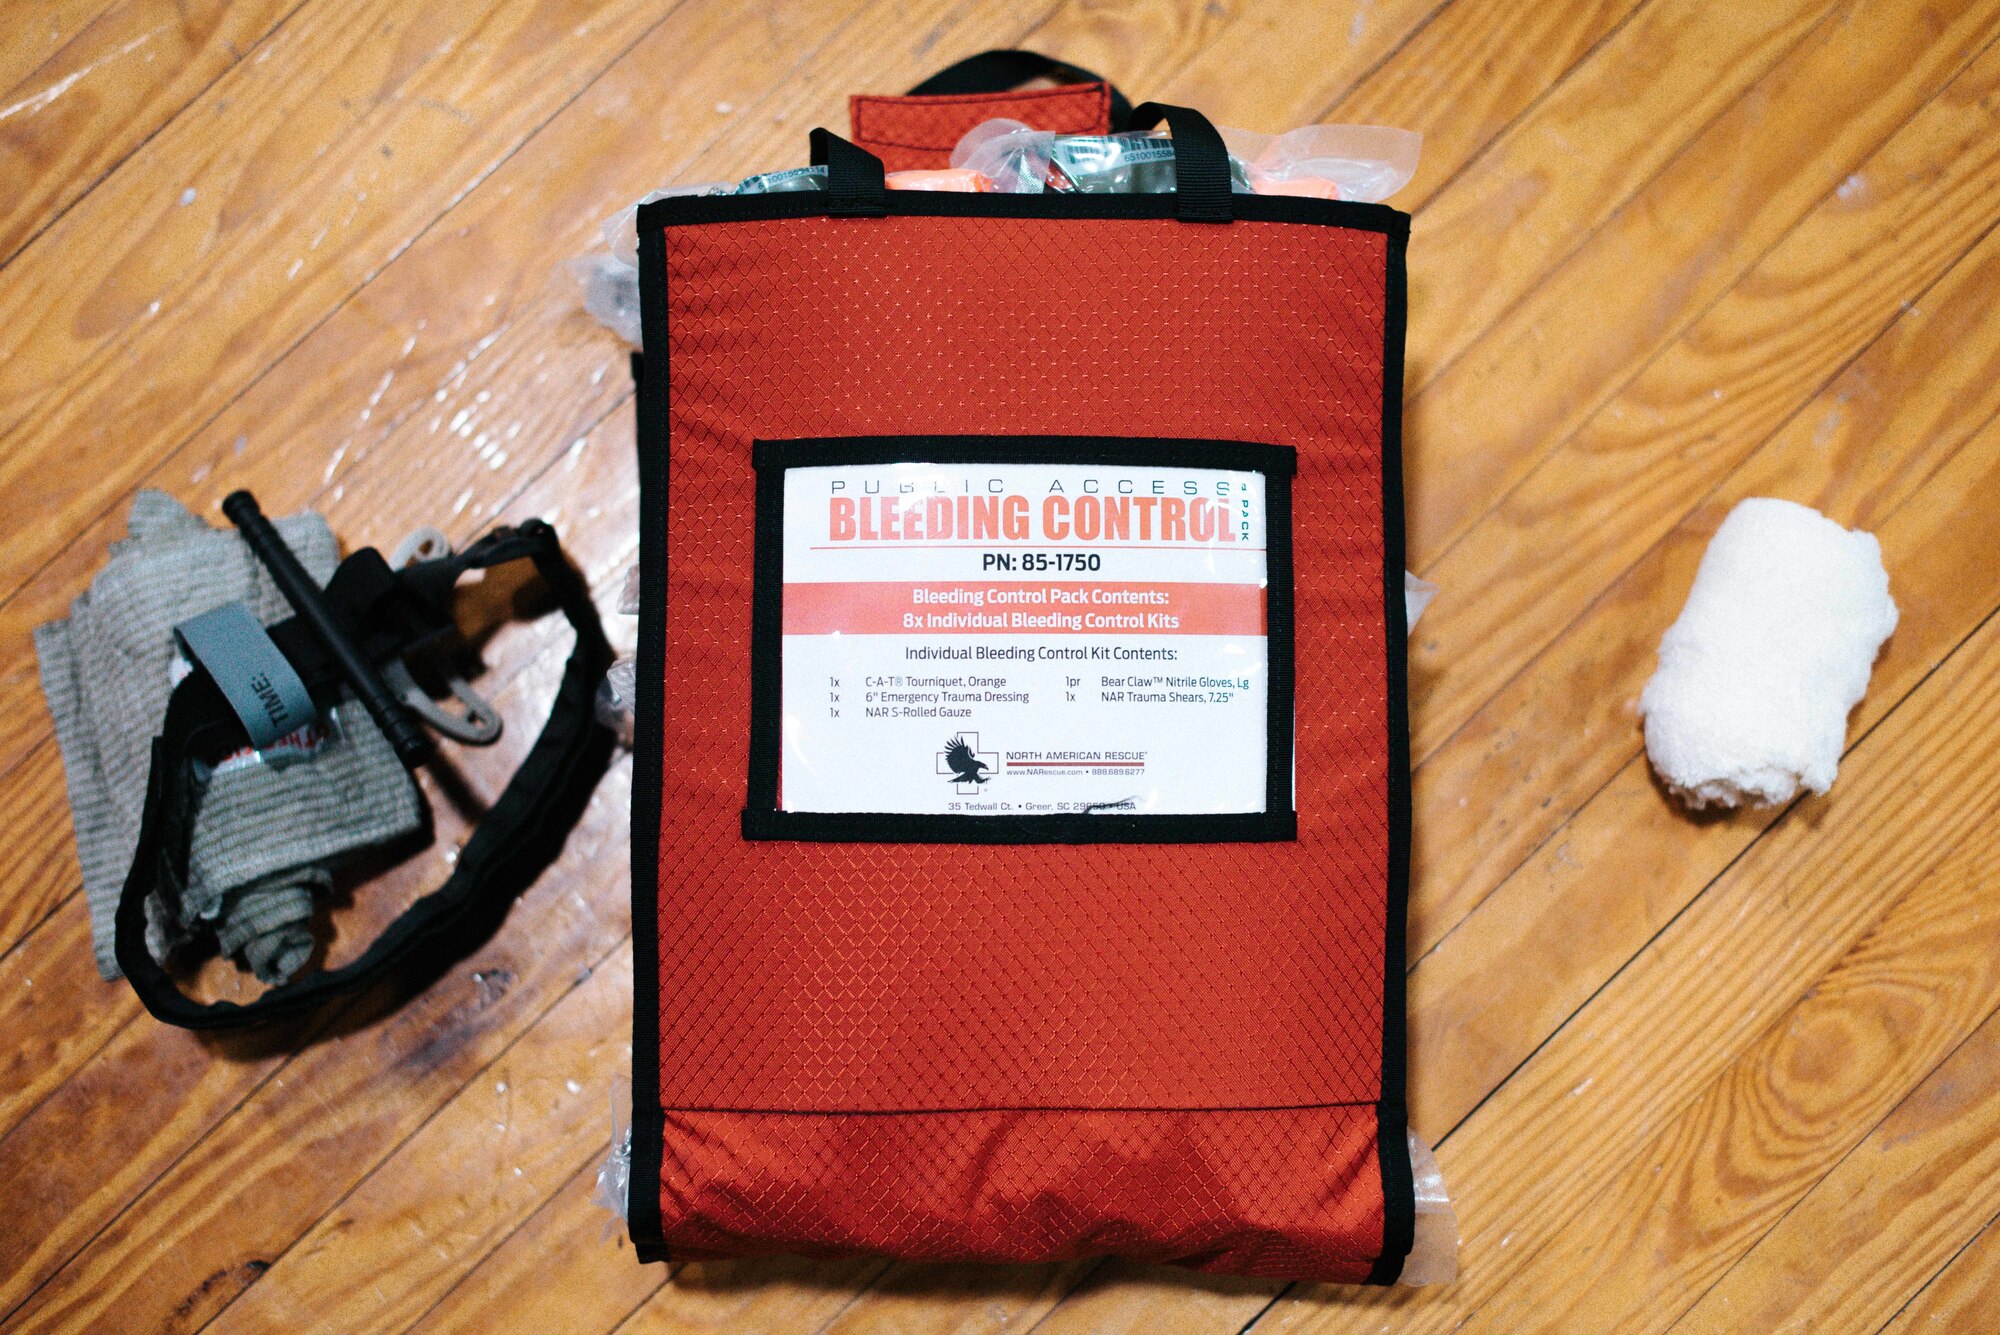 A bleeding control kit is displayed during a bleeding control kit training session at the base theater on Joint Base Andrews, Md., March 29. 2018. The event was a part of the “Stop the Bleed” campaign, which empowers bystanders to understand and implement simple methods to stop or slow life-threatening bleeding, particularly during trauma events.